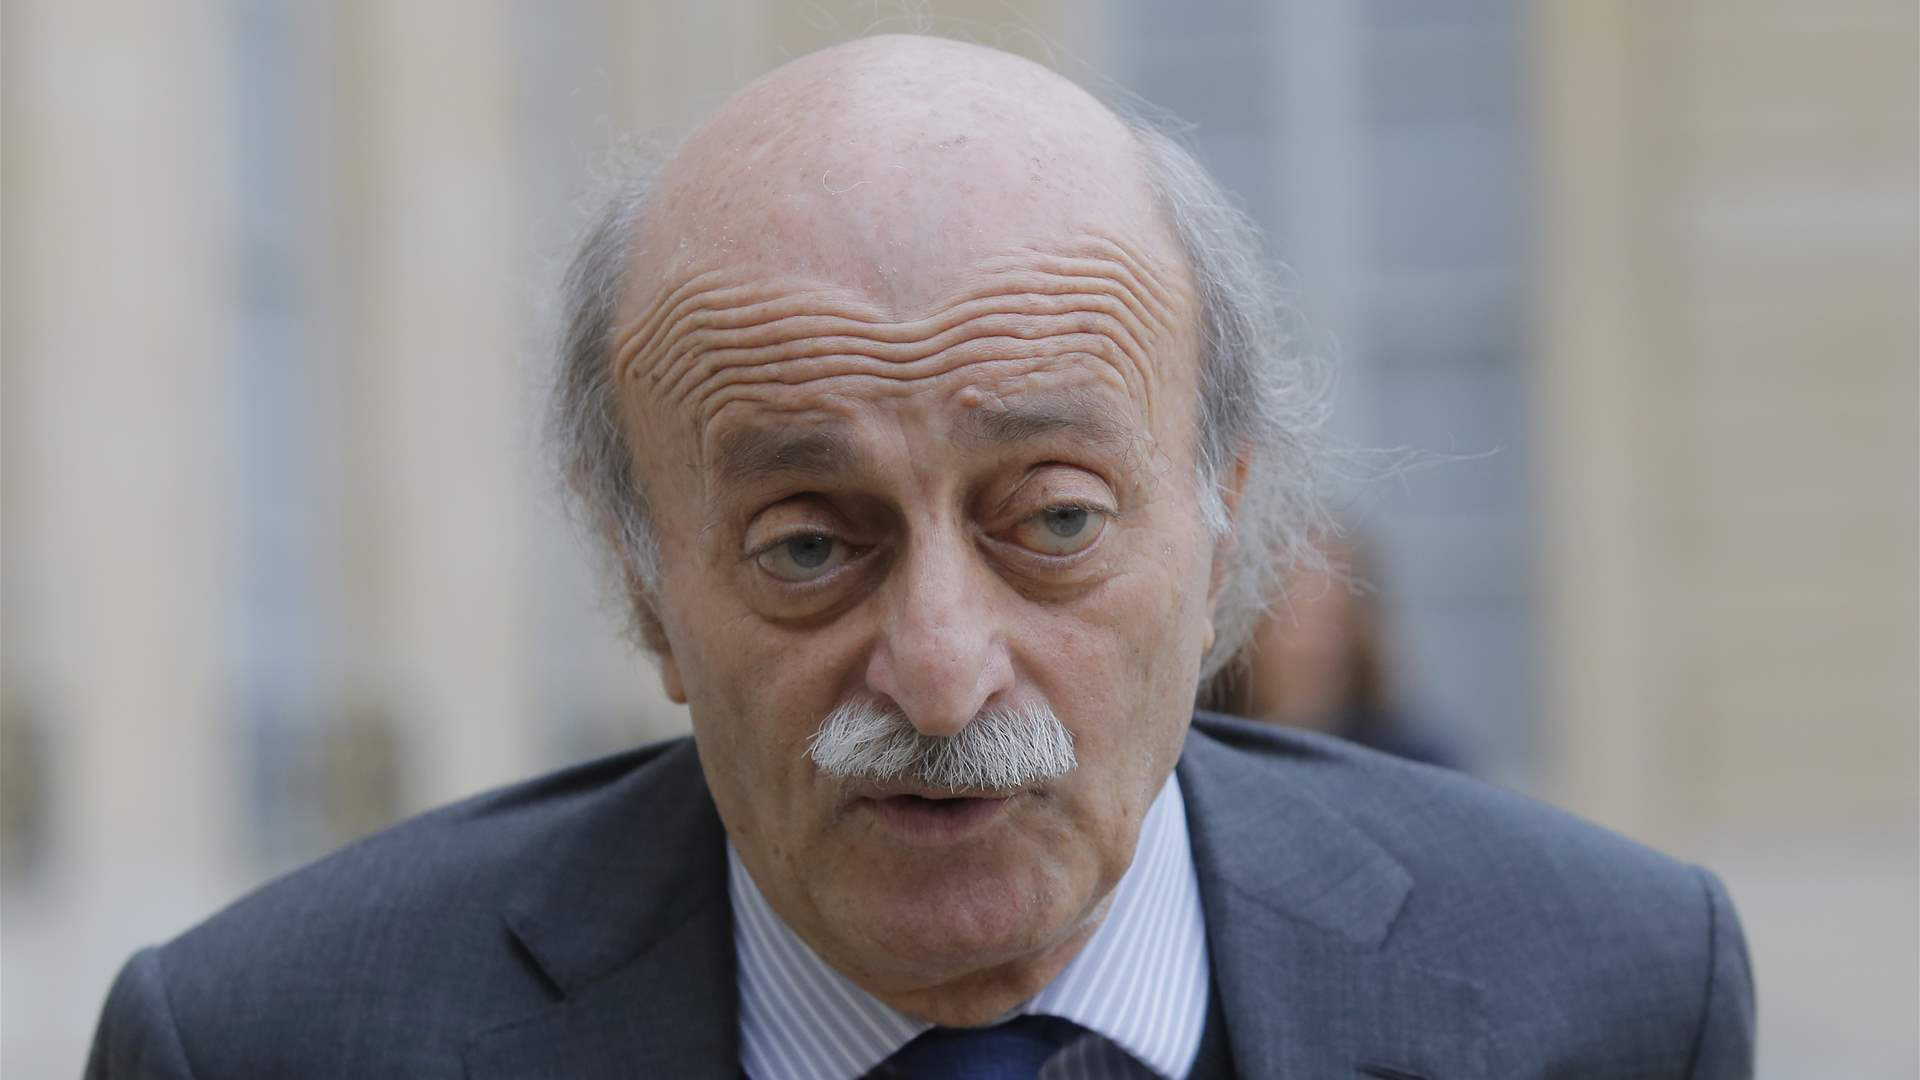 Jumblatt: No Problem for Me In Supporting Election of Sleiman Frangieh or Others 